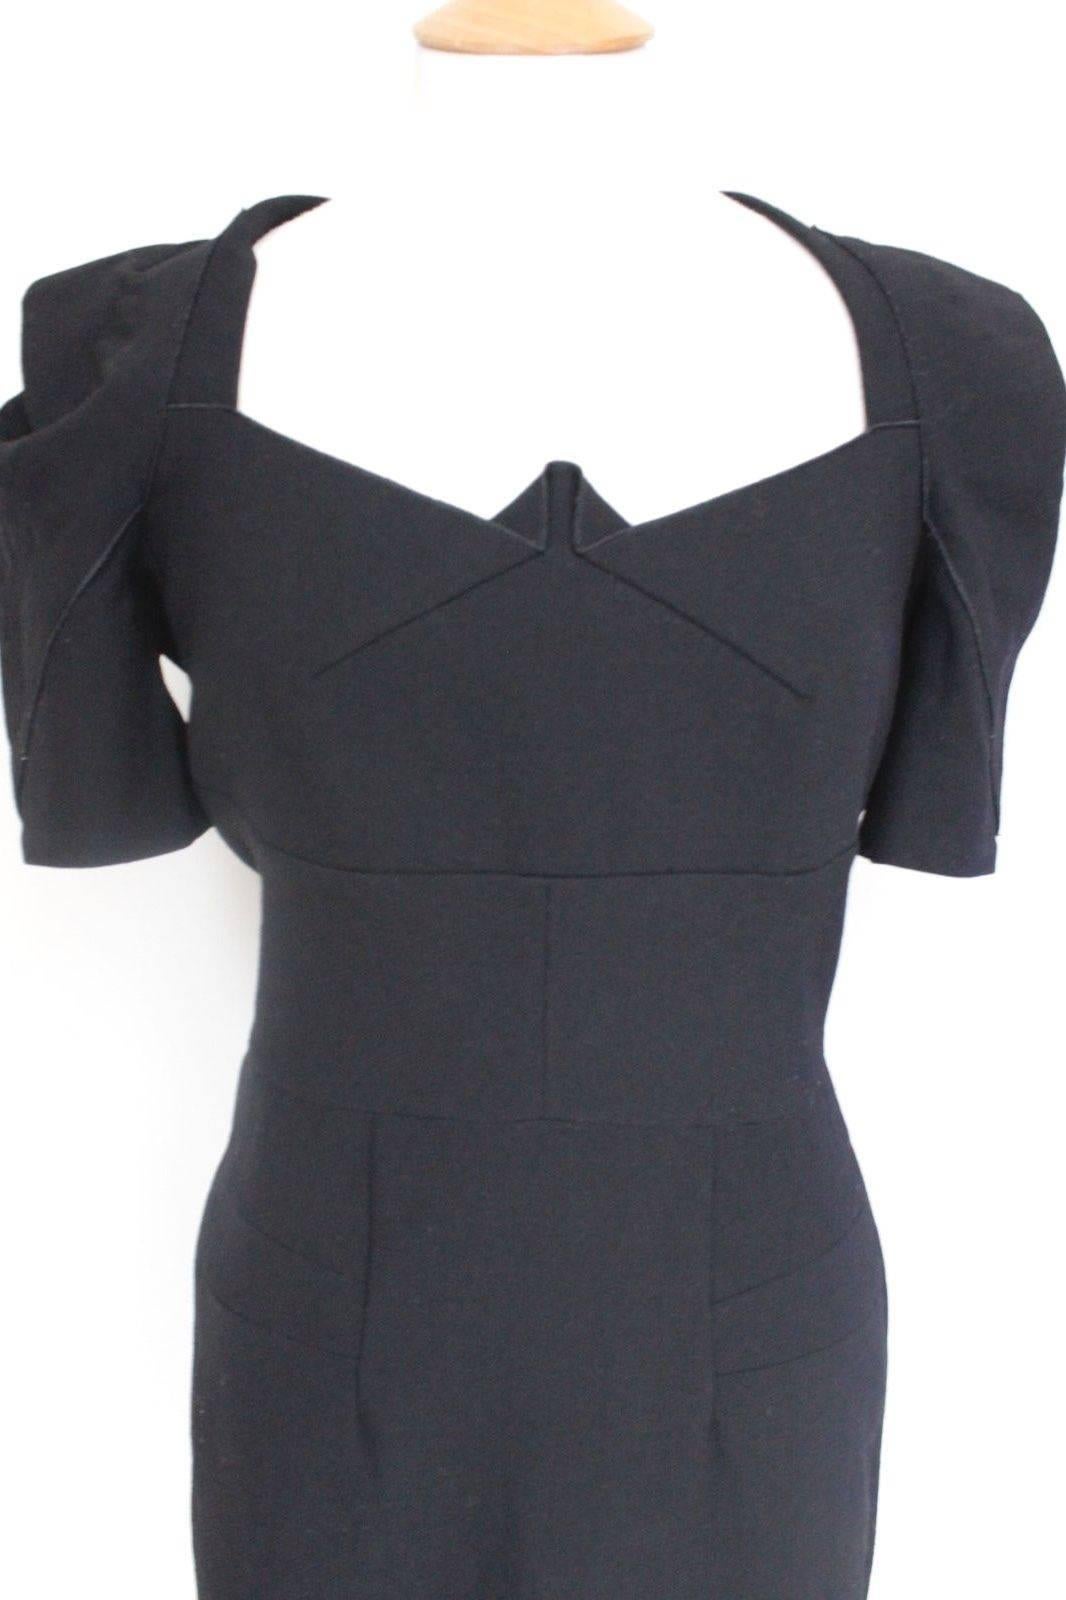 Roland Mouret RM Artemis Black Iconic Celebrity Dress UK 8

Details No-one does figure-cinching style quite like Roland Mouret - this little black dress is a classic example. 

Black wool blend , square neck, folded structured shoulders, pleating at